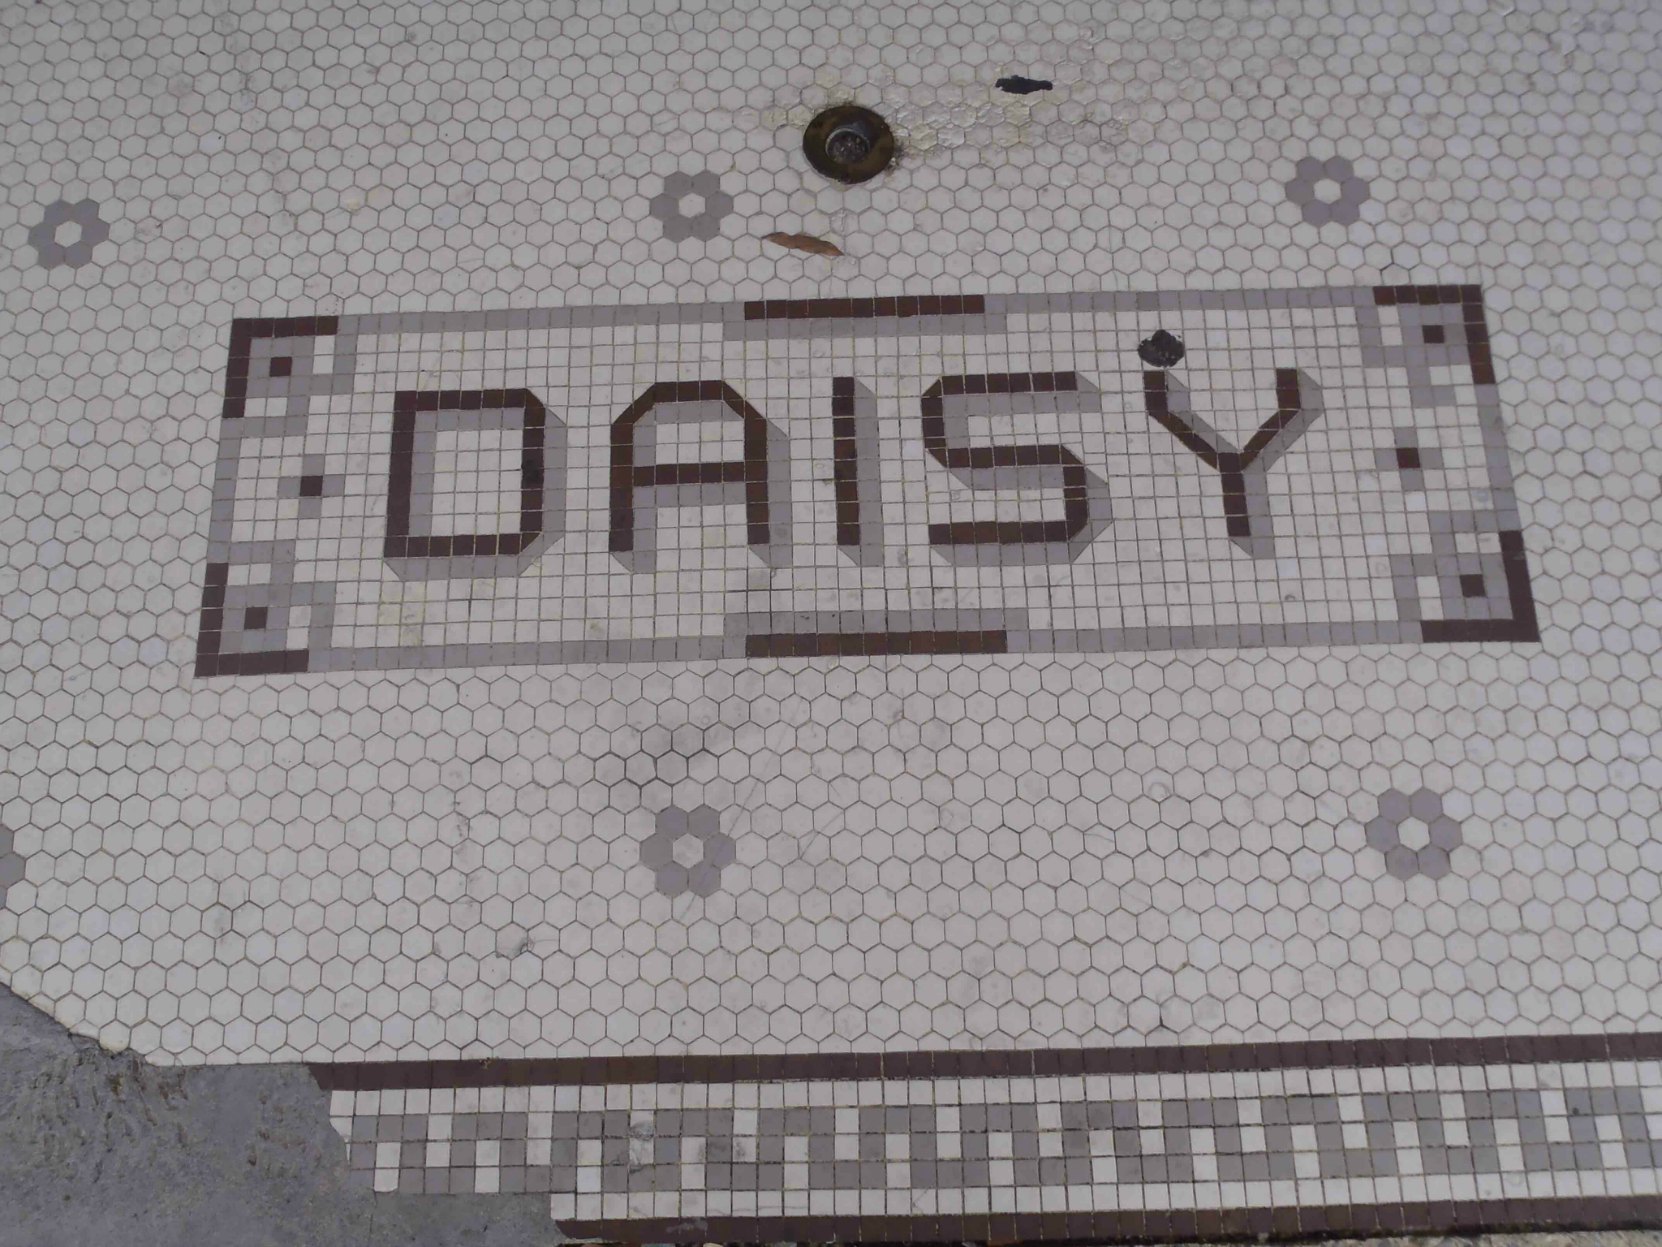 Tiled flooring at the entrance to the Daisy Theatre, 329 Beale Street, Memphis, Tennessee